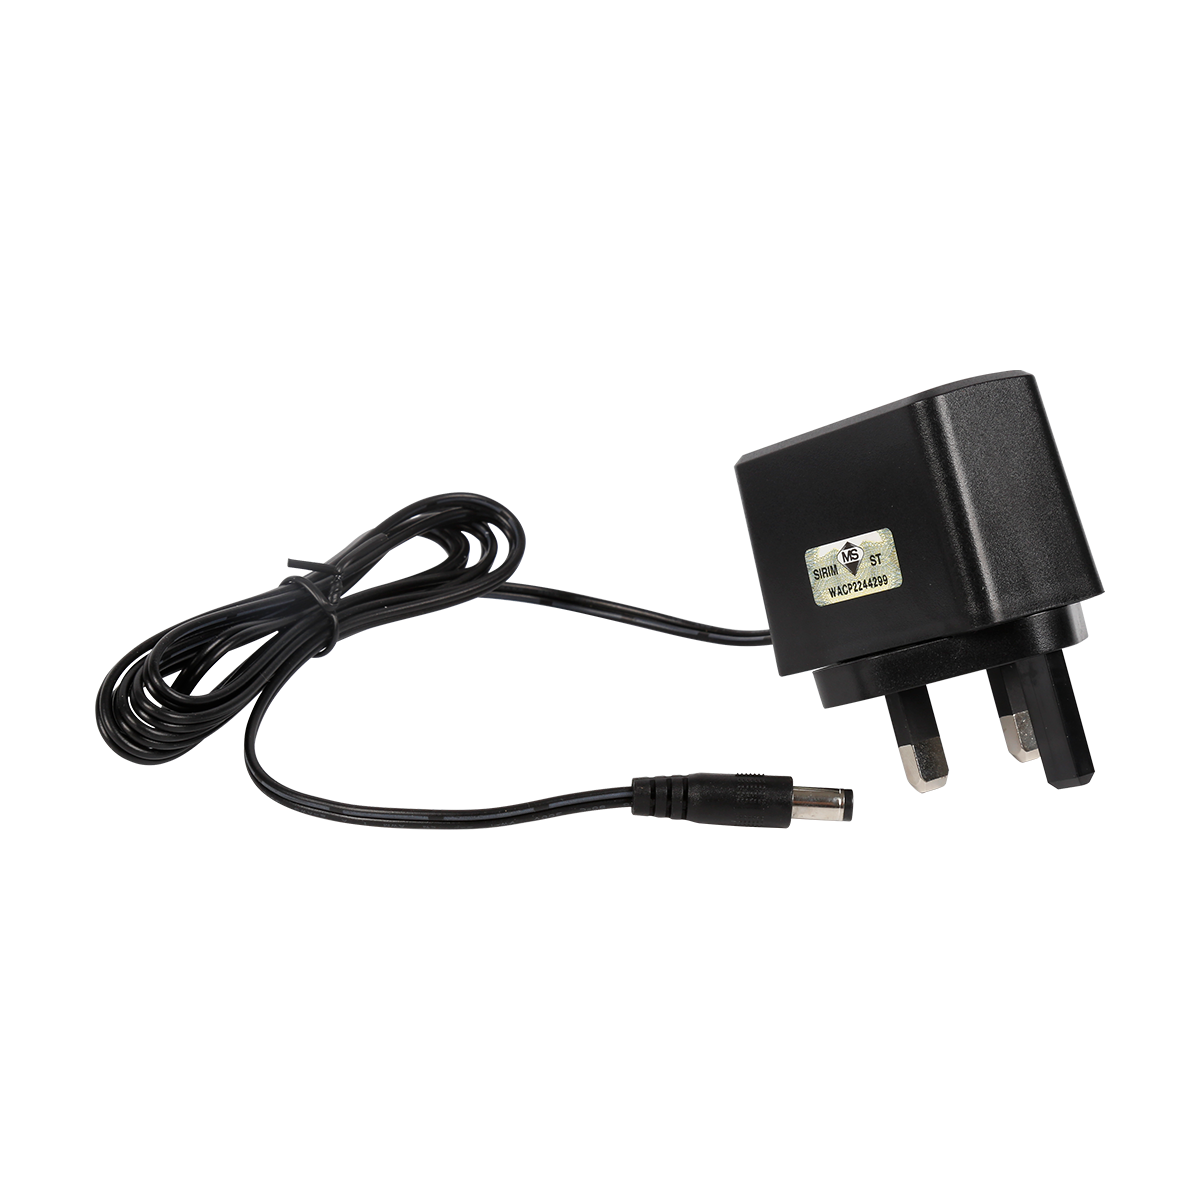 What are the consequences of using a poor quality power supply?ac dc power adapters(图1)